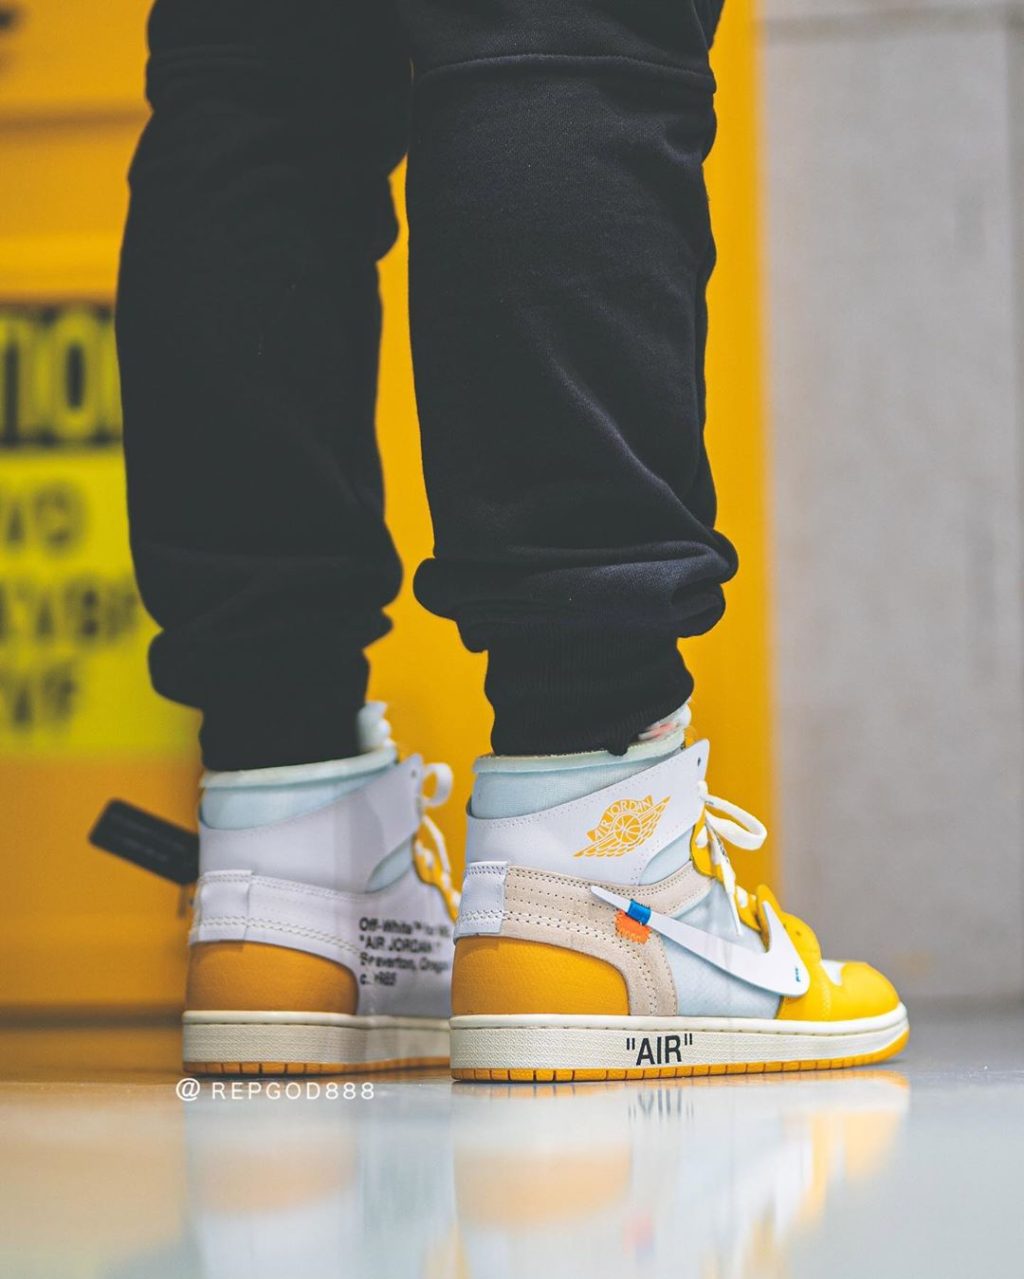 off-white-nike-air-jordan-1-high-canary-yellow-release-2020